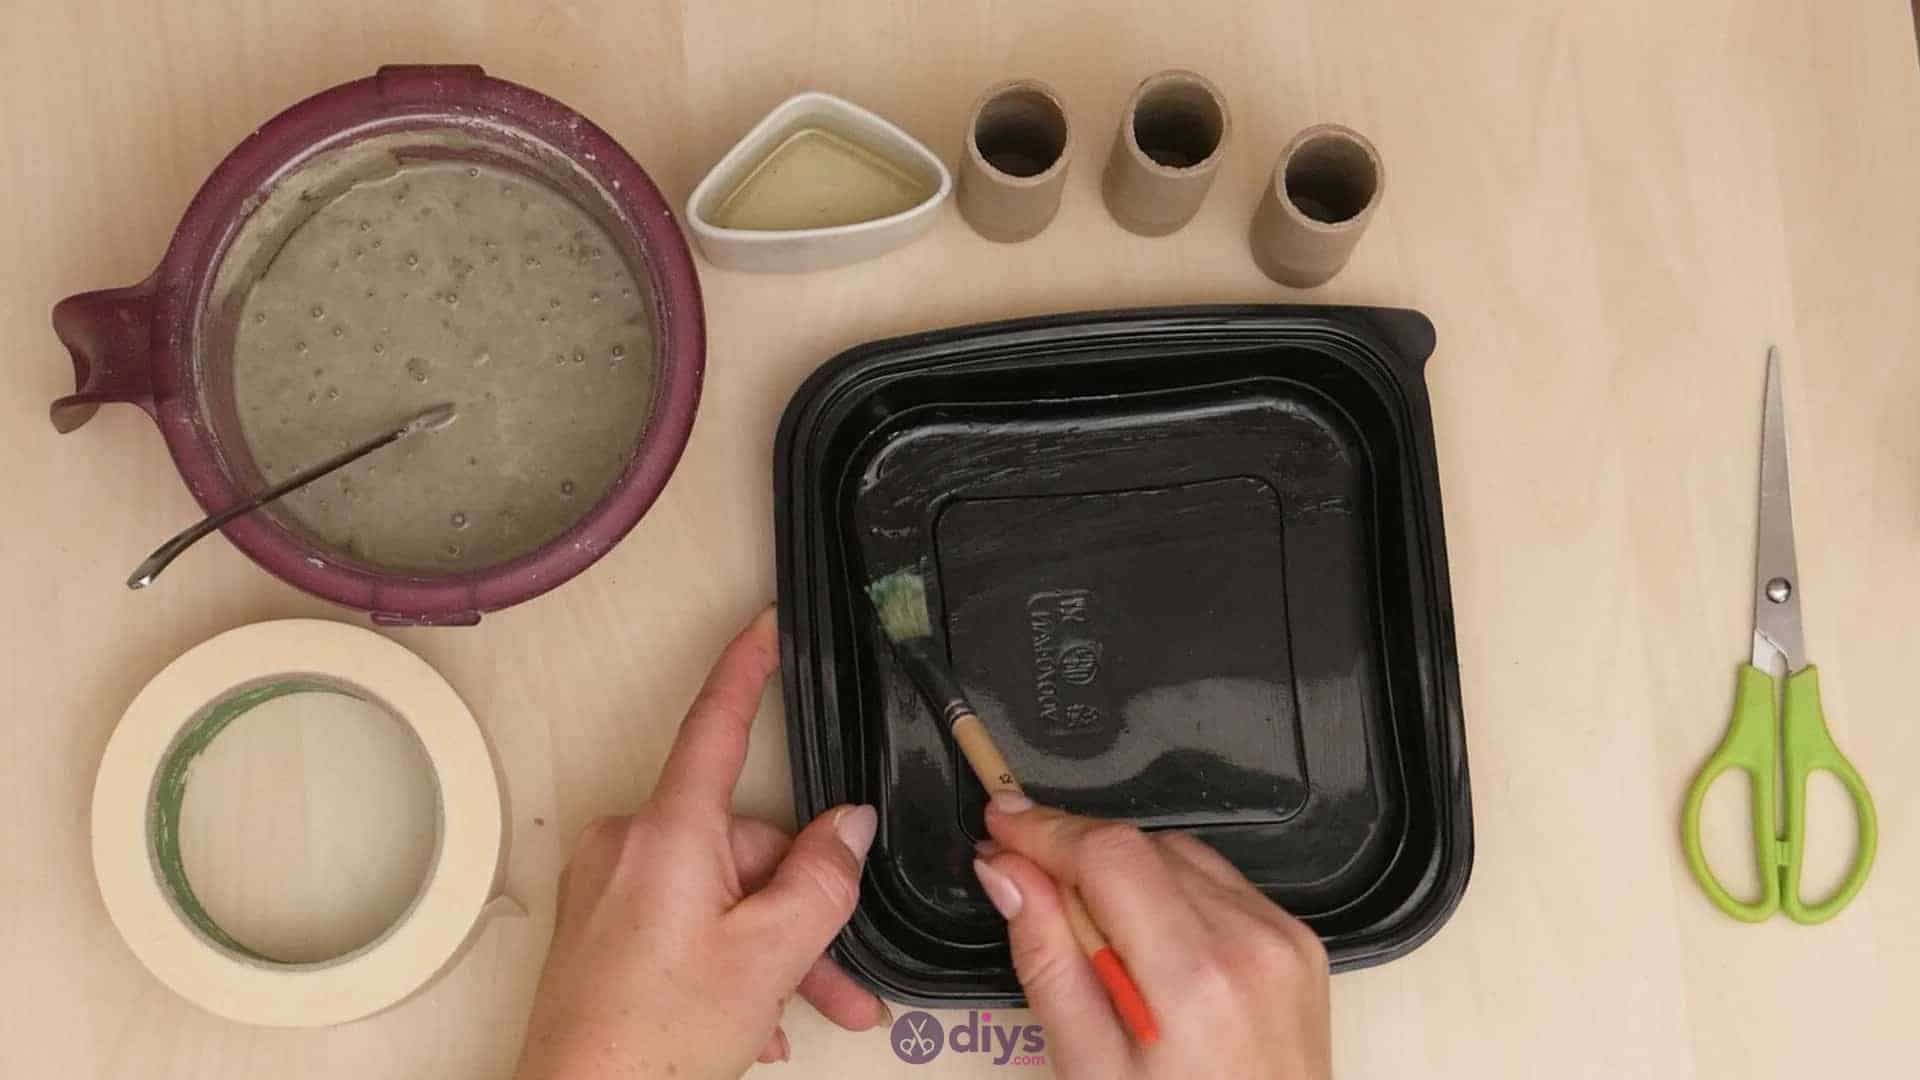 Diy concrete candle holder plate step 2